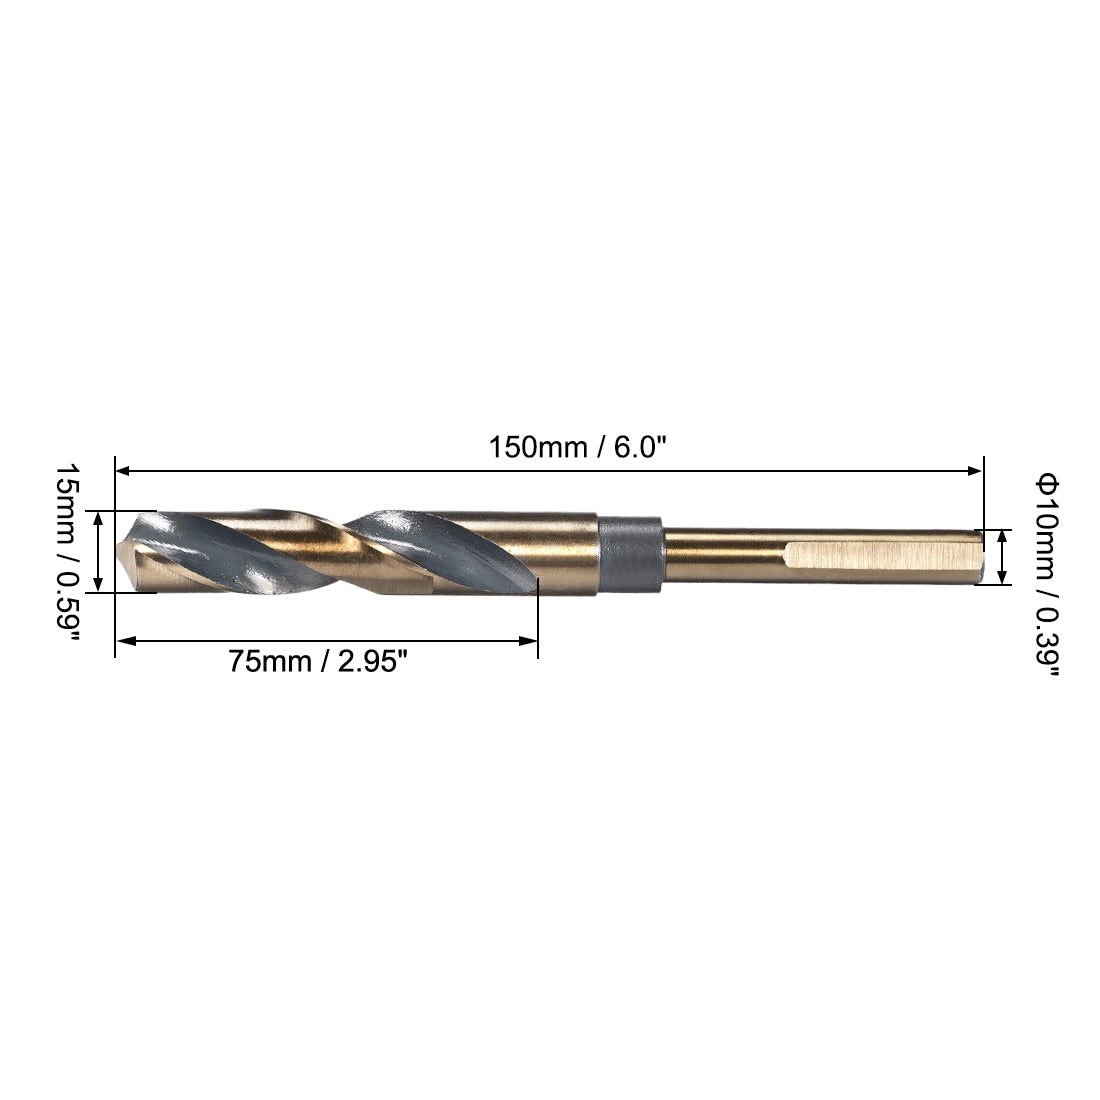 Uxcell Uxcell Reduced Shank Twist Drill Bits 18.5mm HSS 4341 with 10mm Shank 1 Pcs